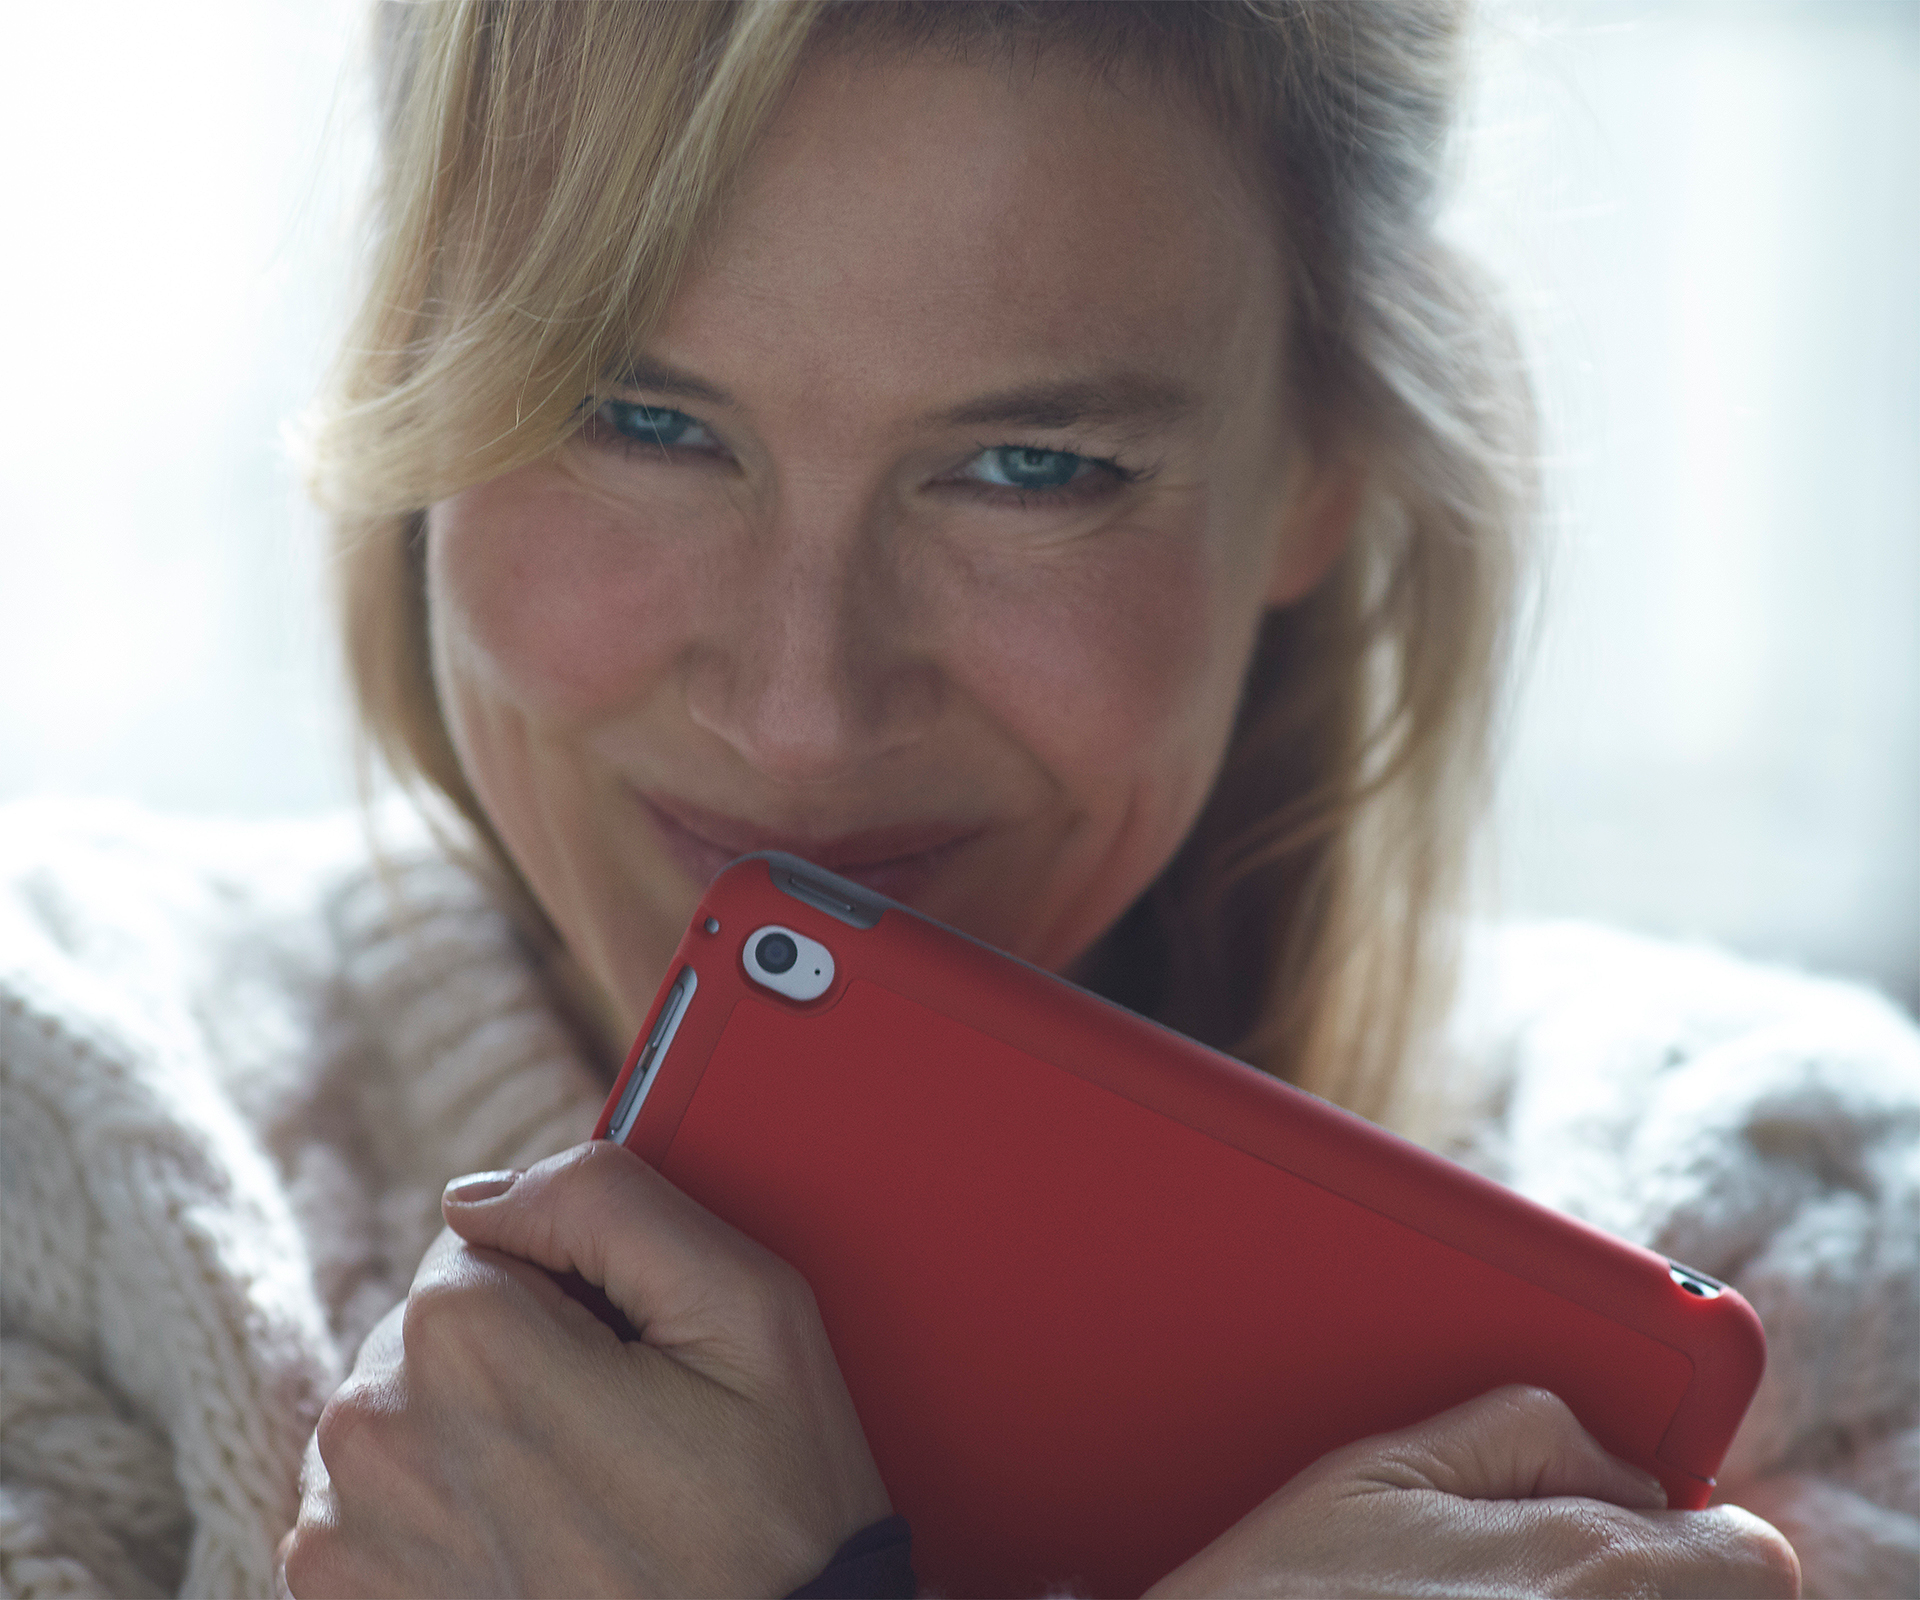 Renee Zellweger spotted on set of new Bridget Jones movie with a very special surprise